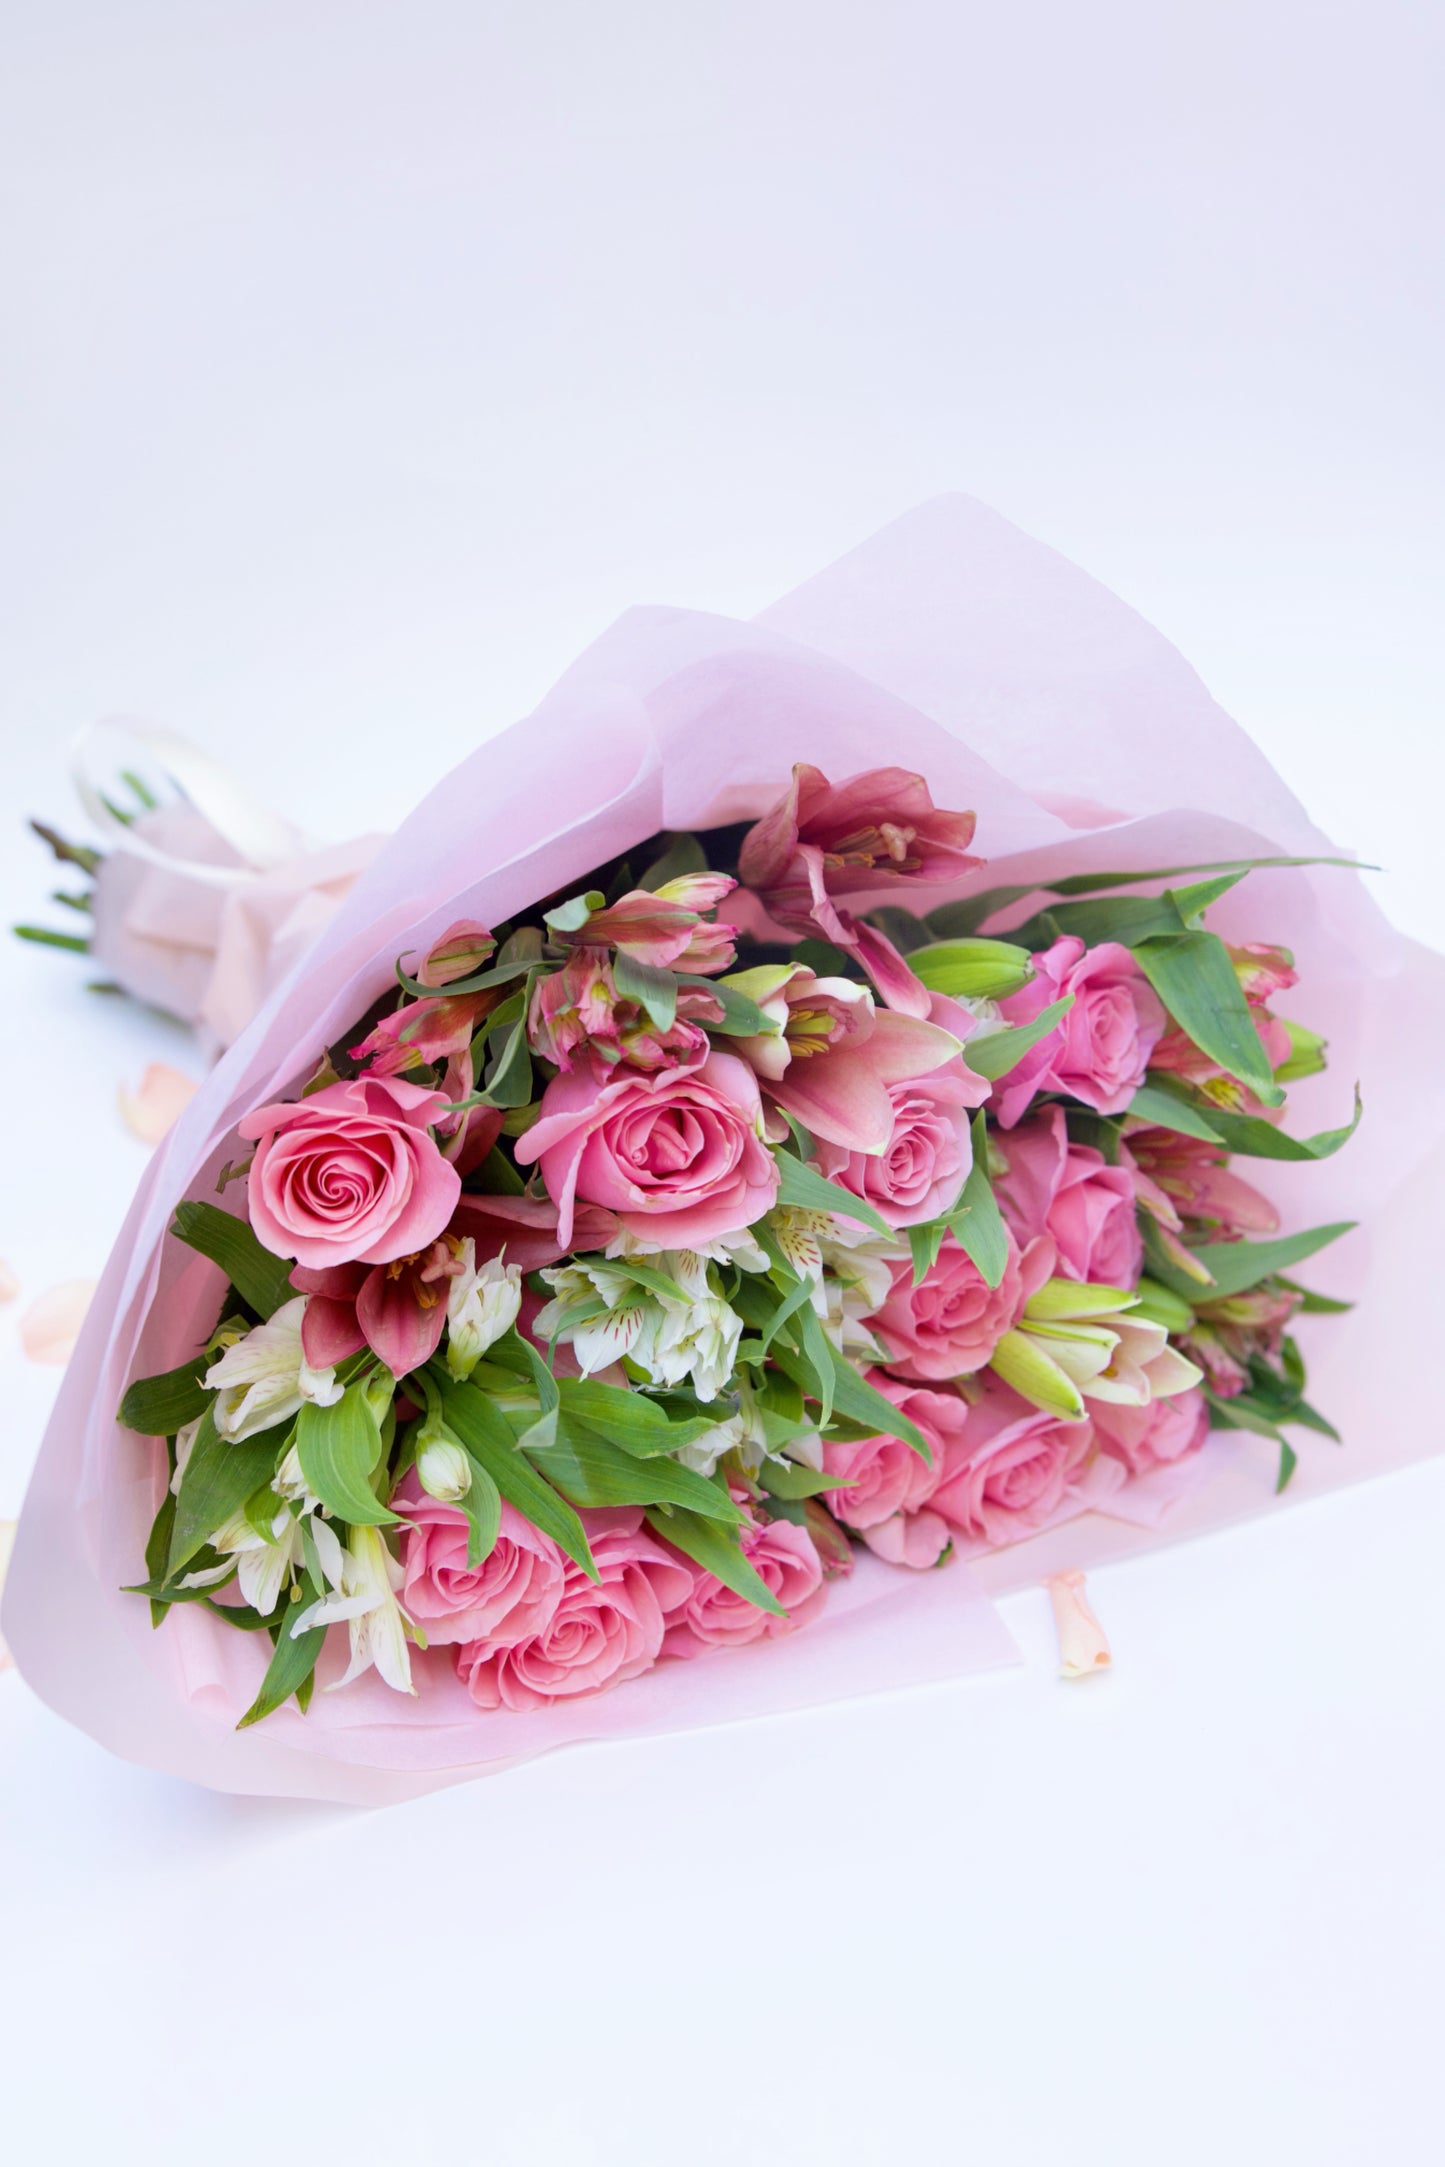 Enchant your loved ones with our Roses and Seasonal Flowers bouquet. This captivating arrangement blends classic roses with the freshest seasonal blooms, creating a vibrant and stunning display. Order now to brighten someone's day with this beautiful bouquet!